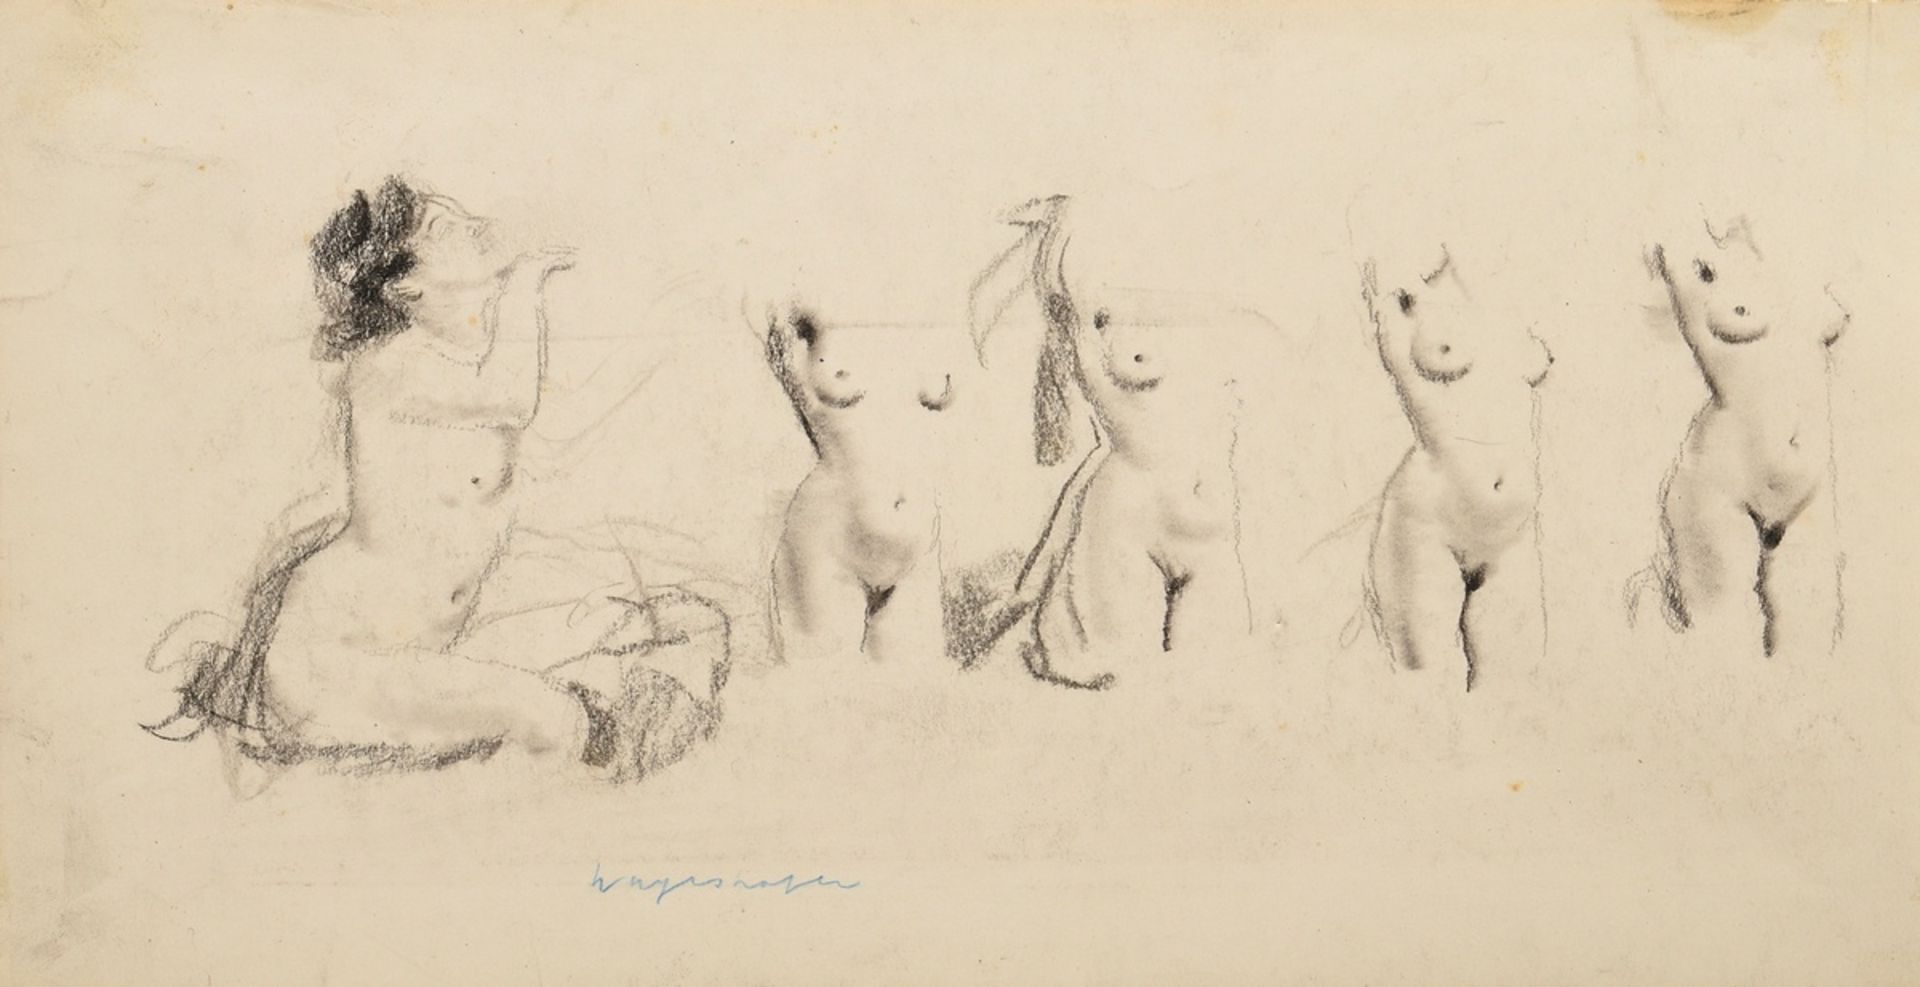 17 Mayershofer, Max (1875-1950) "Female nude drawings", charcoal, each sign., each mounted in passe - Image 9 of 19